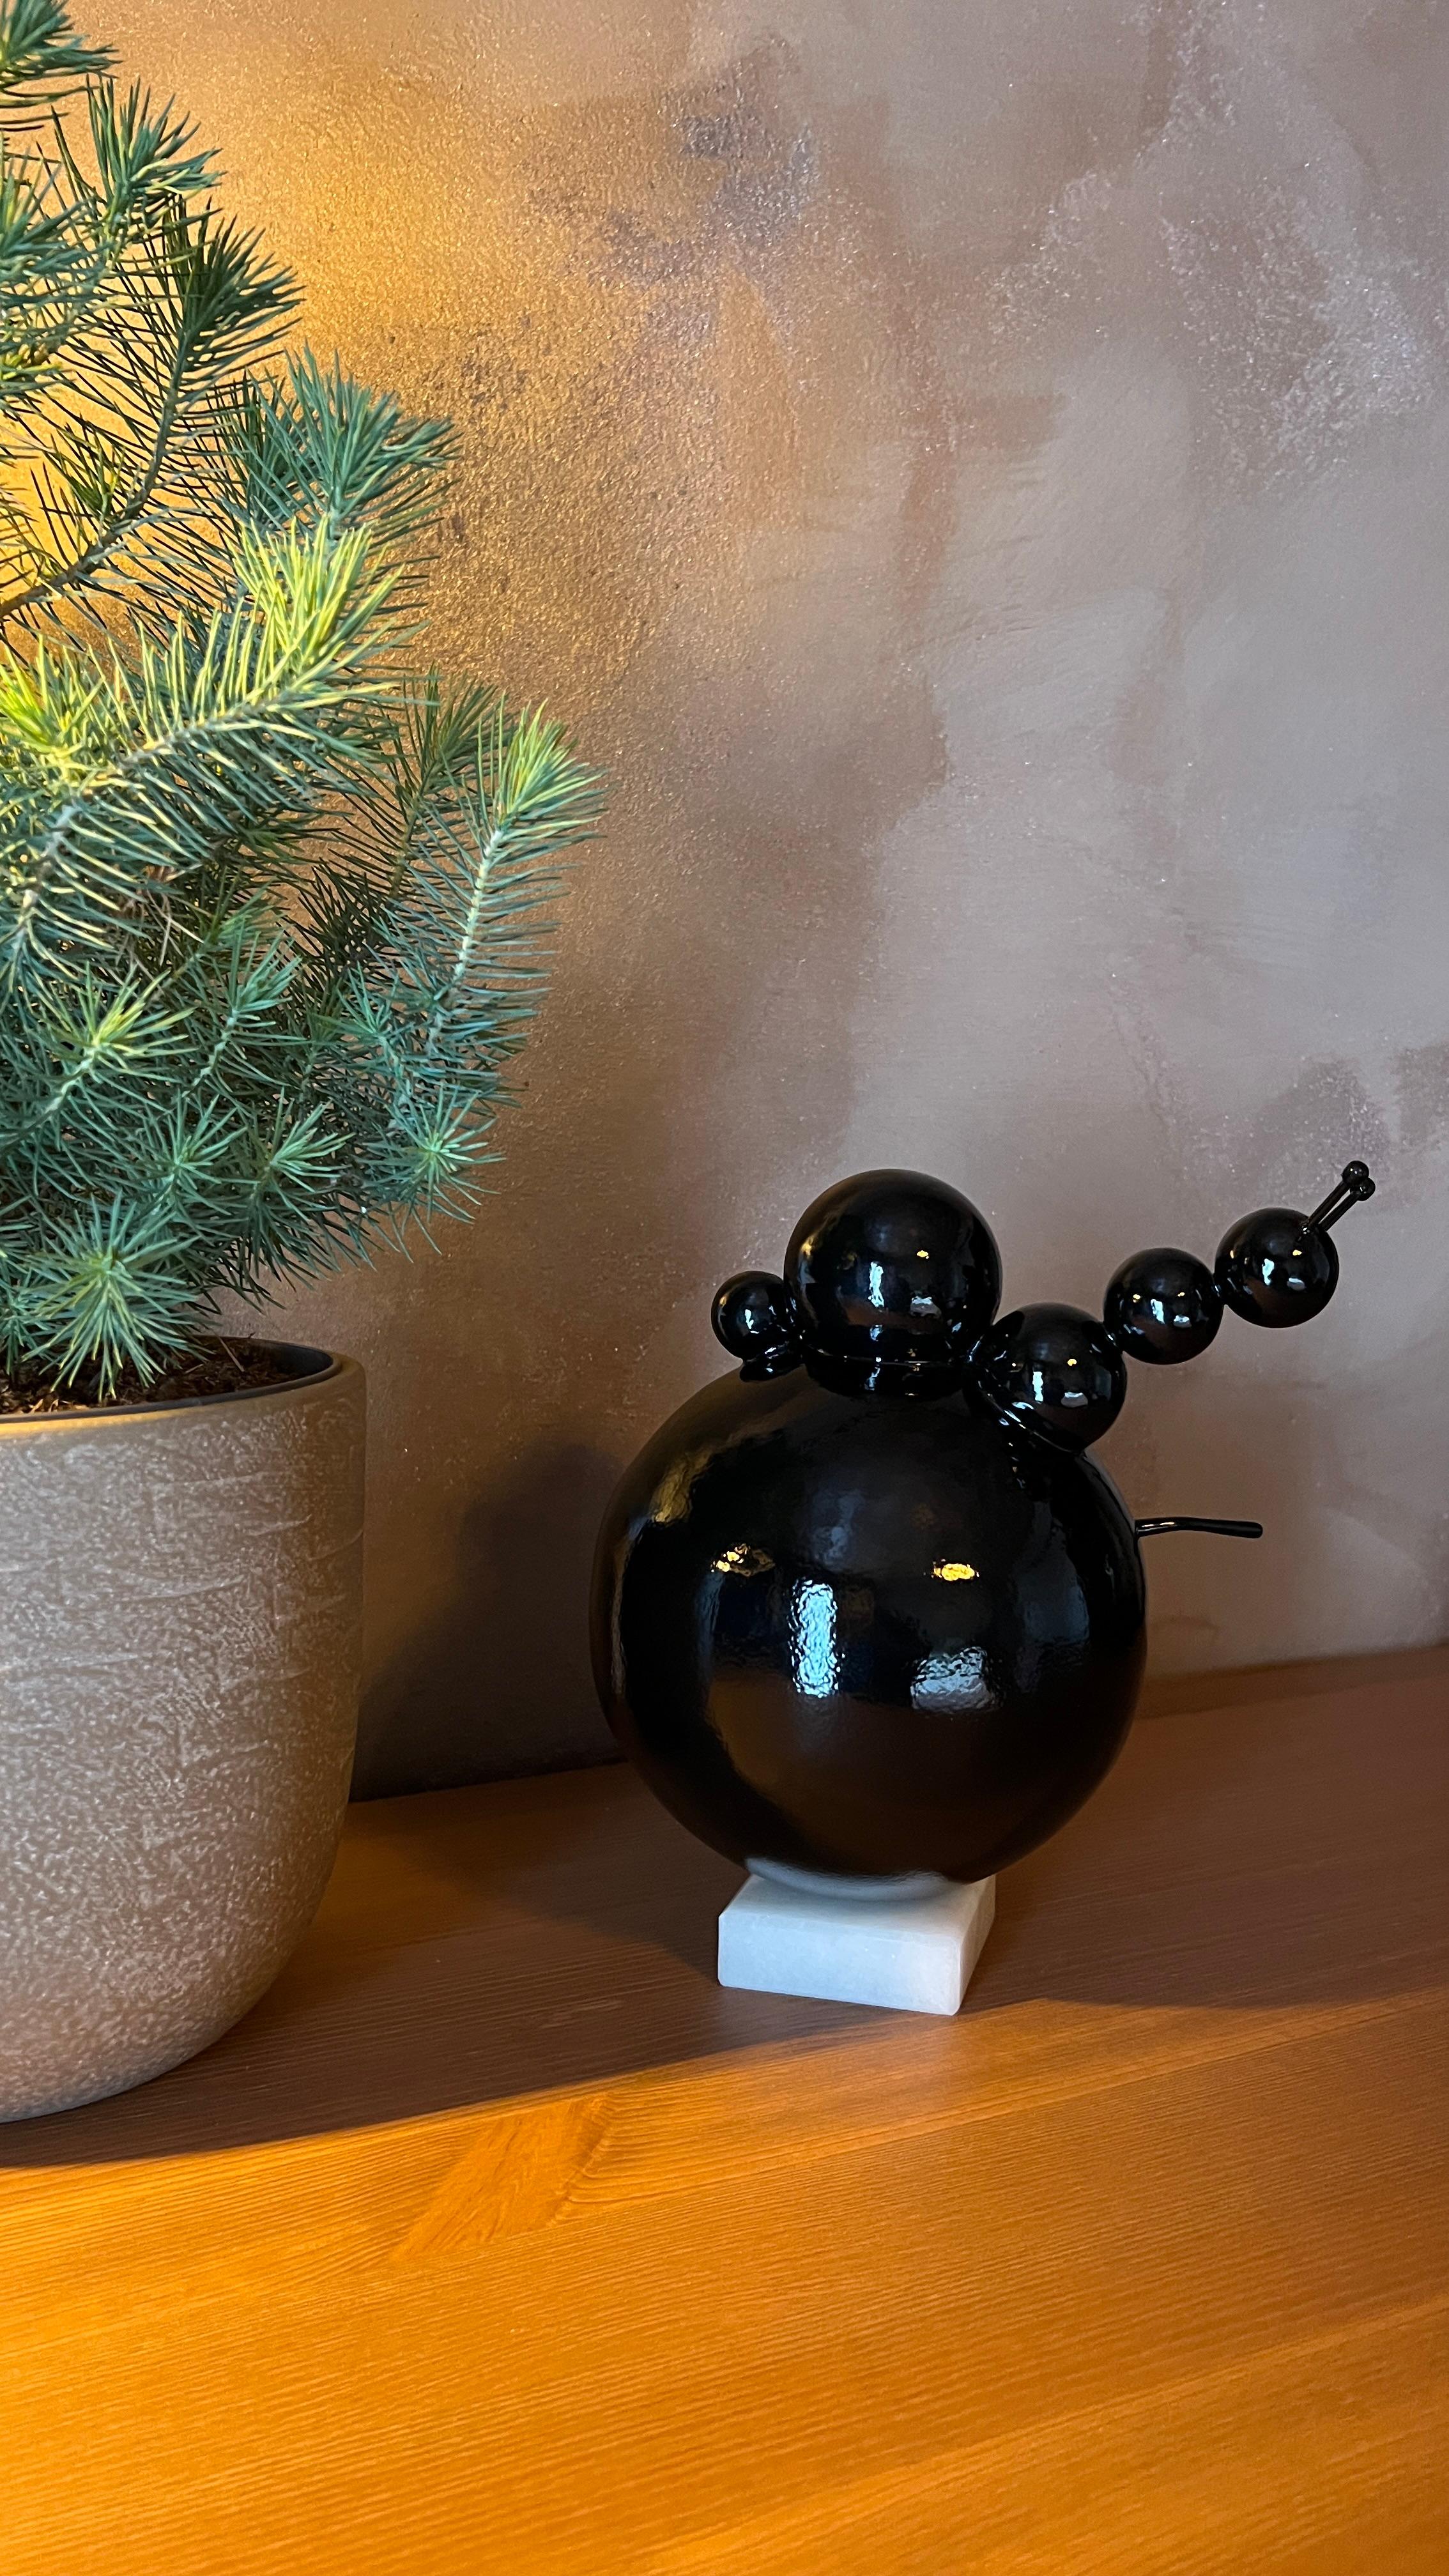 Made in the UK, 2021.

Black. Minimalistic. Abstract. Spheres: from molecules to planets. Look around: mono sphere or billions of small combinations of spheres - this all is our world.

Please, note, real product colours may vary slightly from the